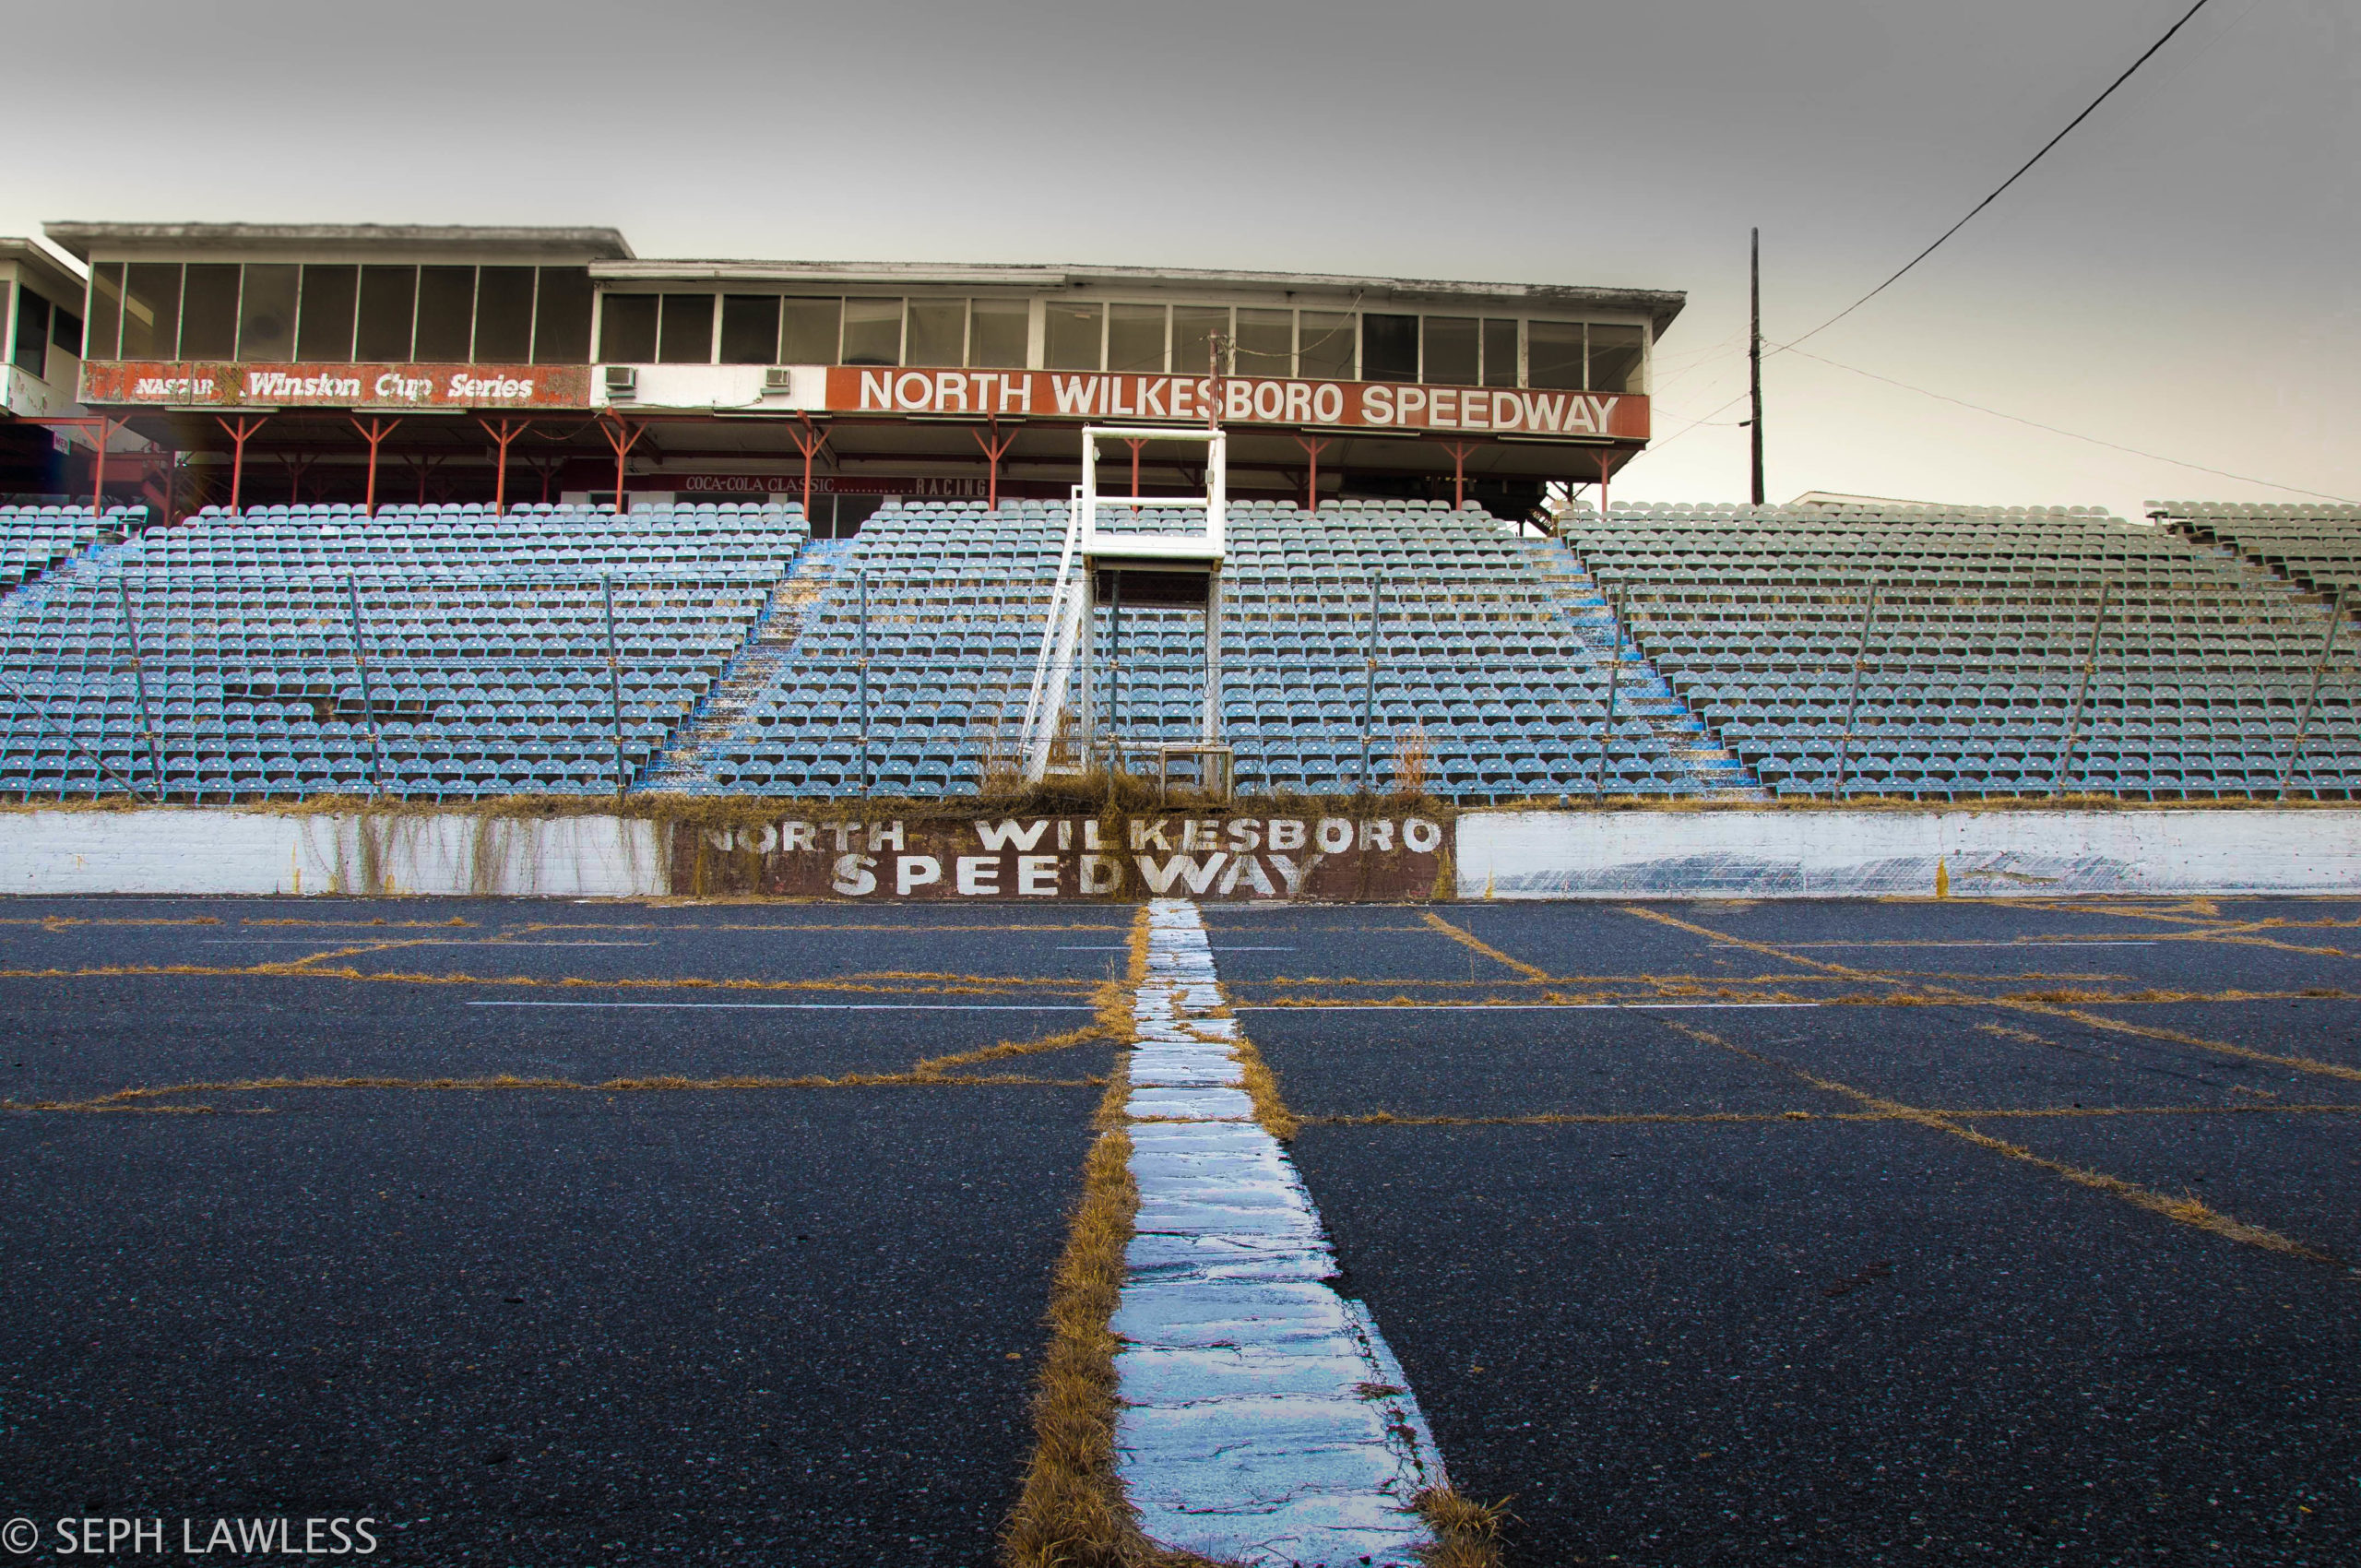 NASCAR’s Original Racetrack Is An Abandoned Ruin Today